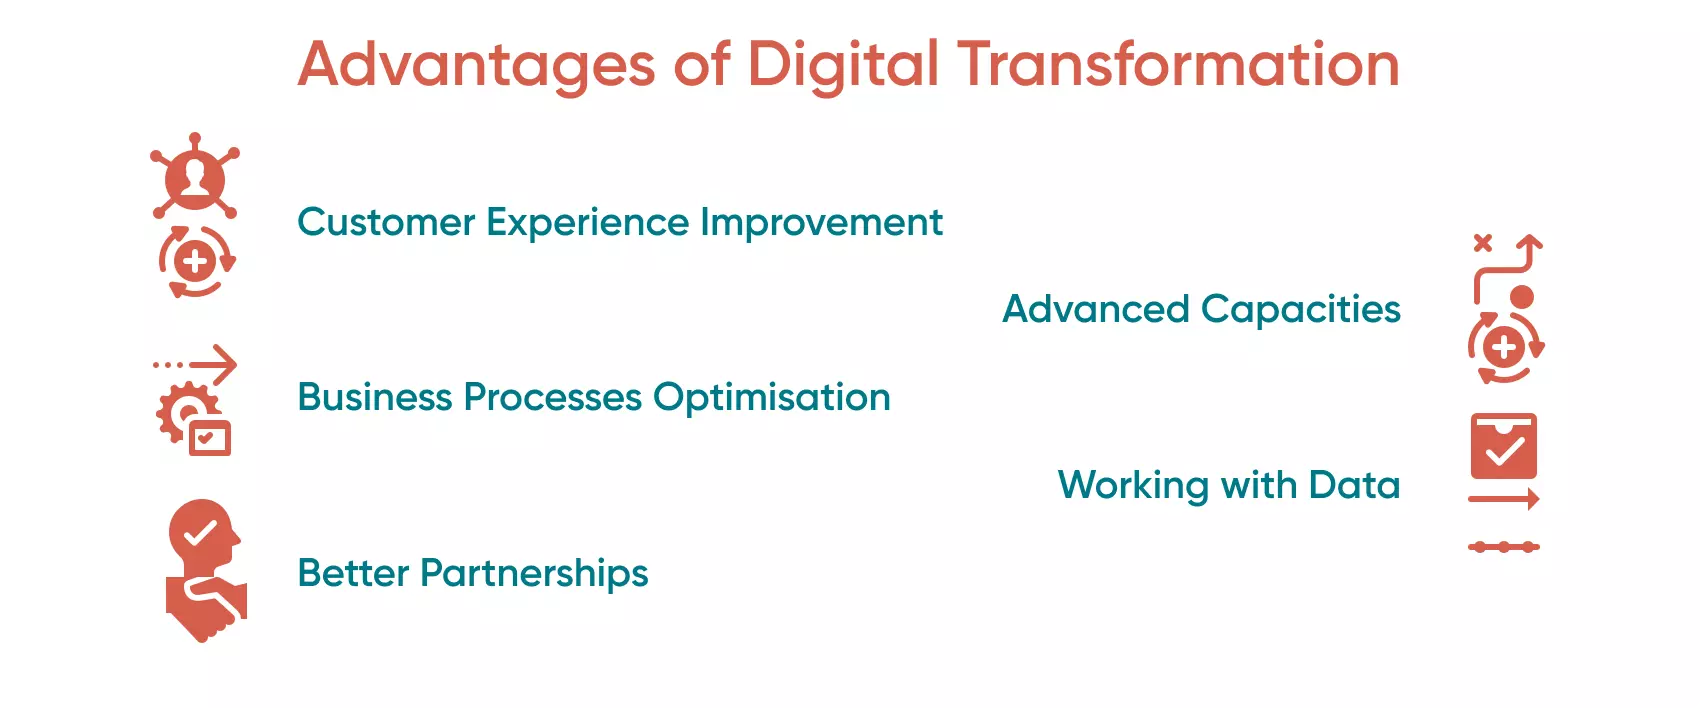 There are many reasons for embarking on a digital transformation journey, and there are some advantages considered the main drivers. 